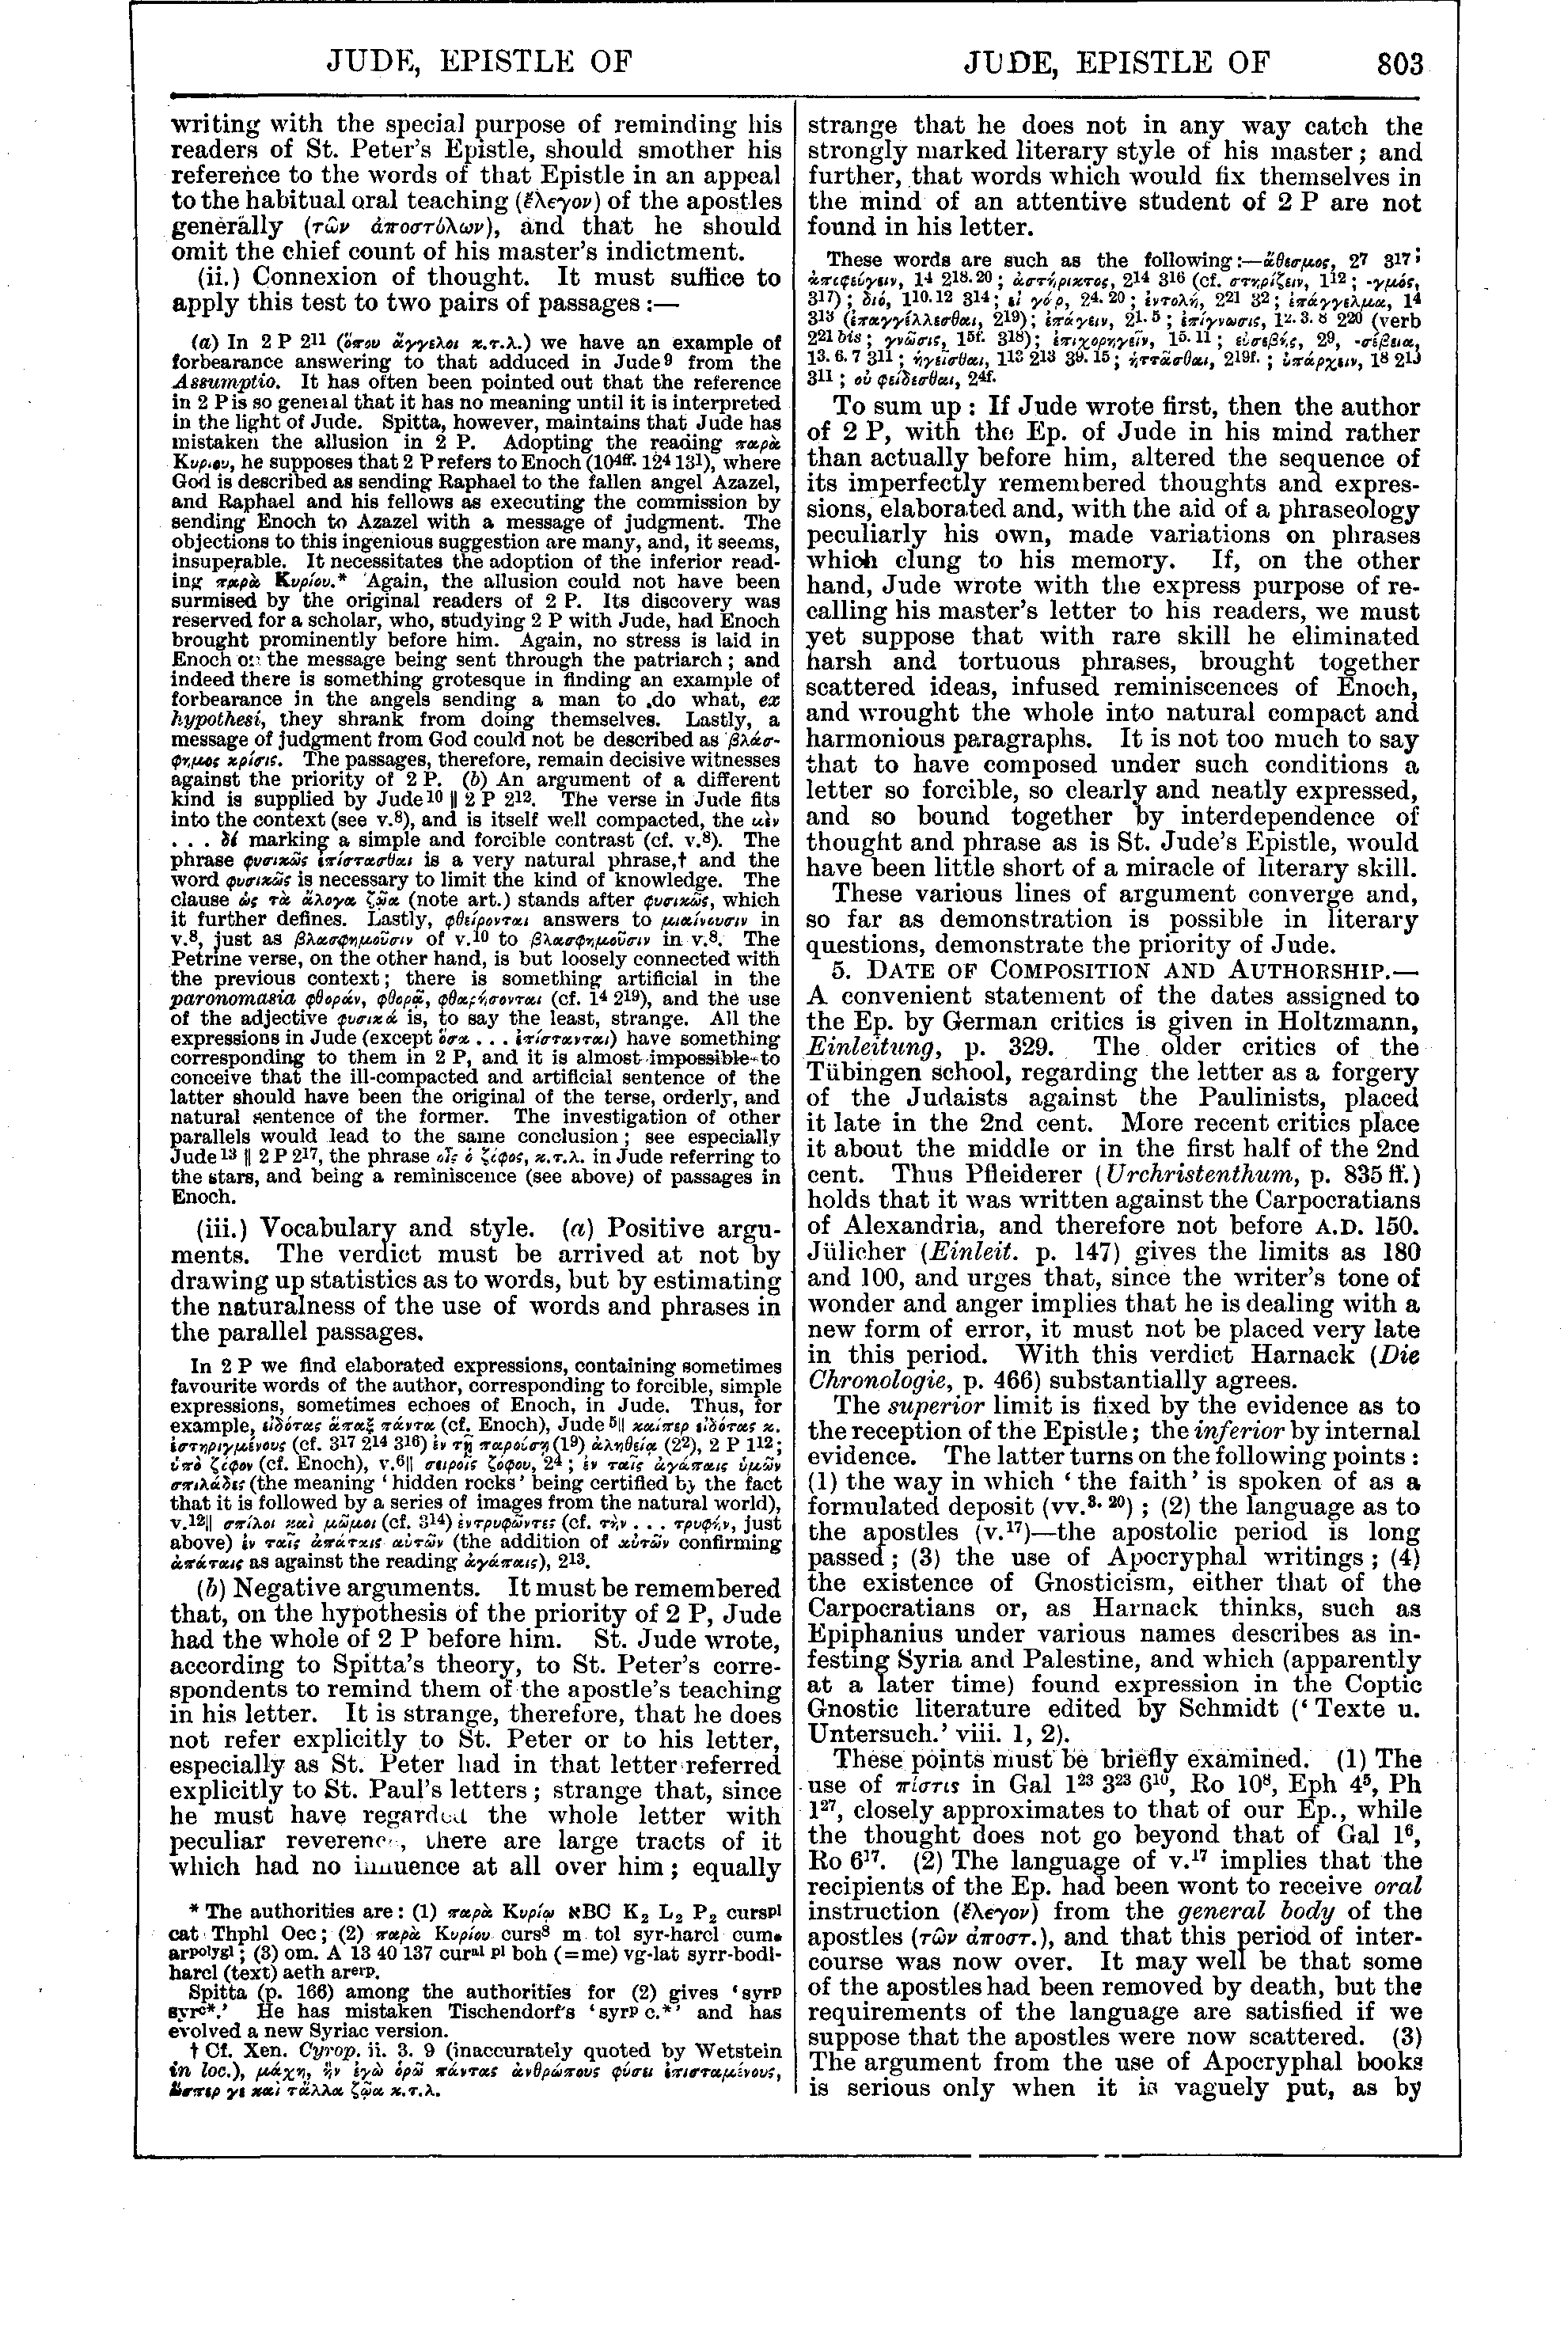 Image of page 803